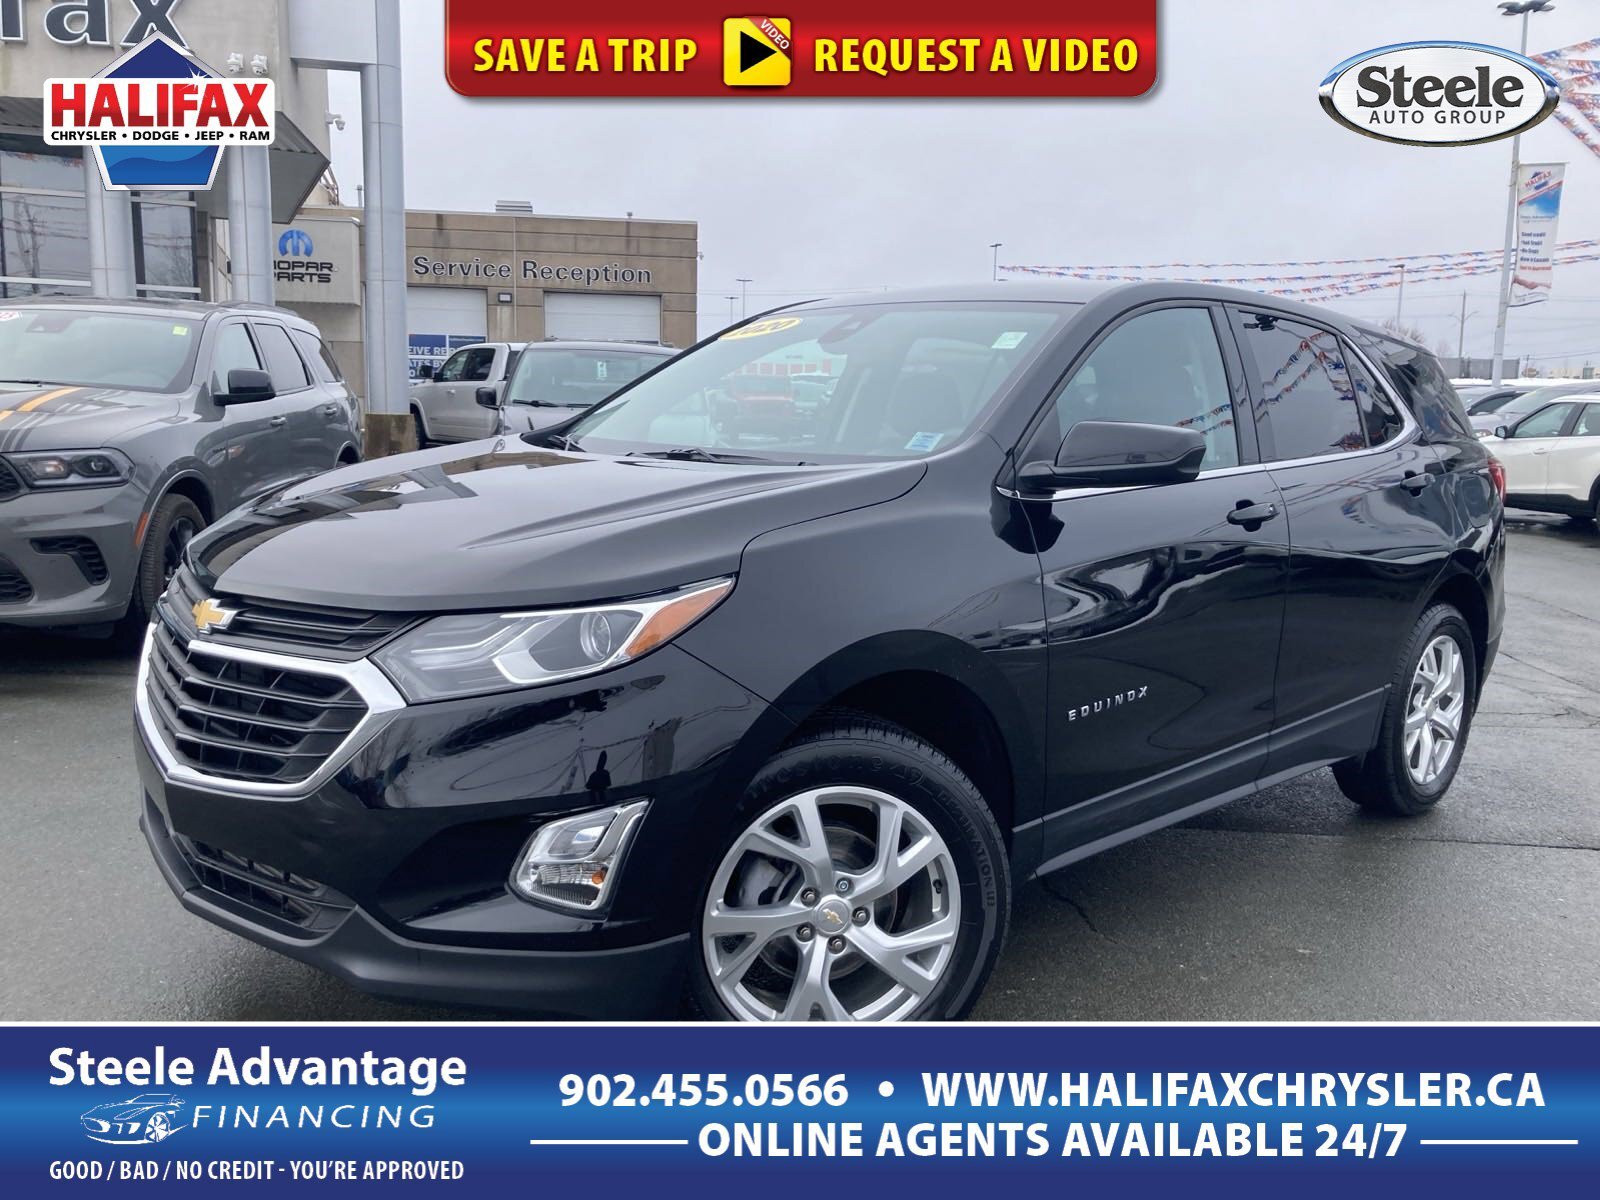 2020 Chevrolet Equinox LT  AFFORDABLE AWD!! LOW KM, HEATED SEATS, BACK UP